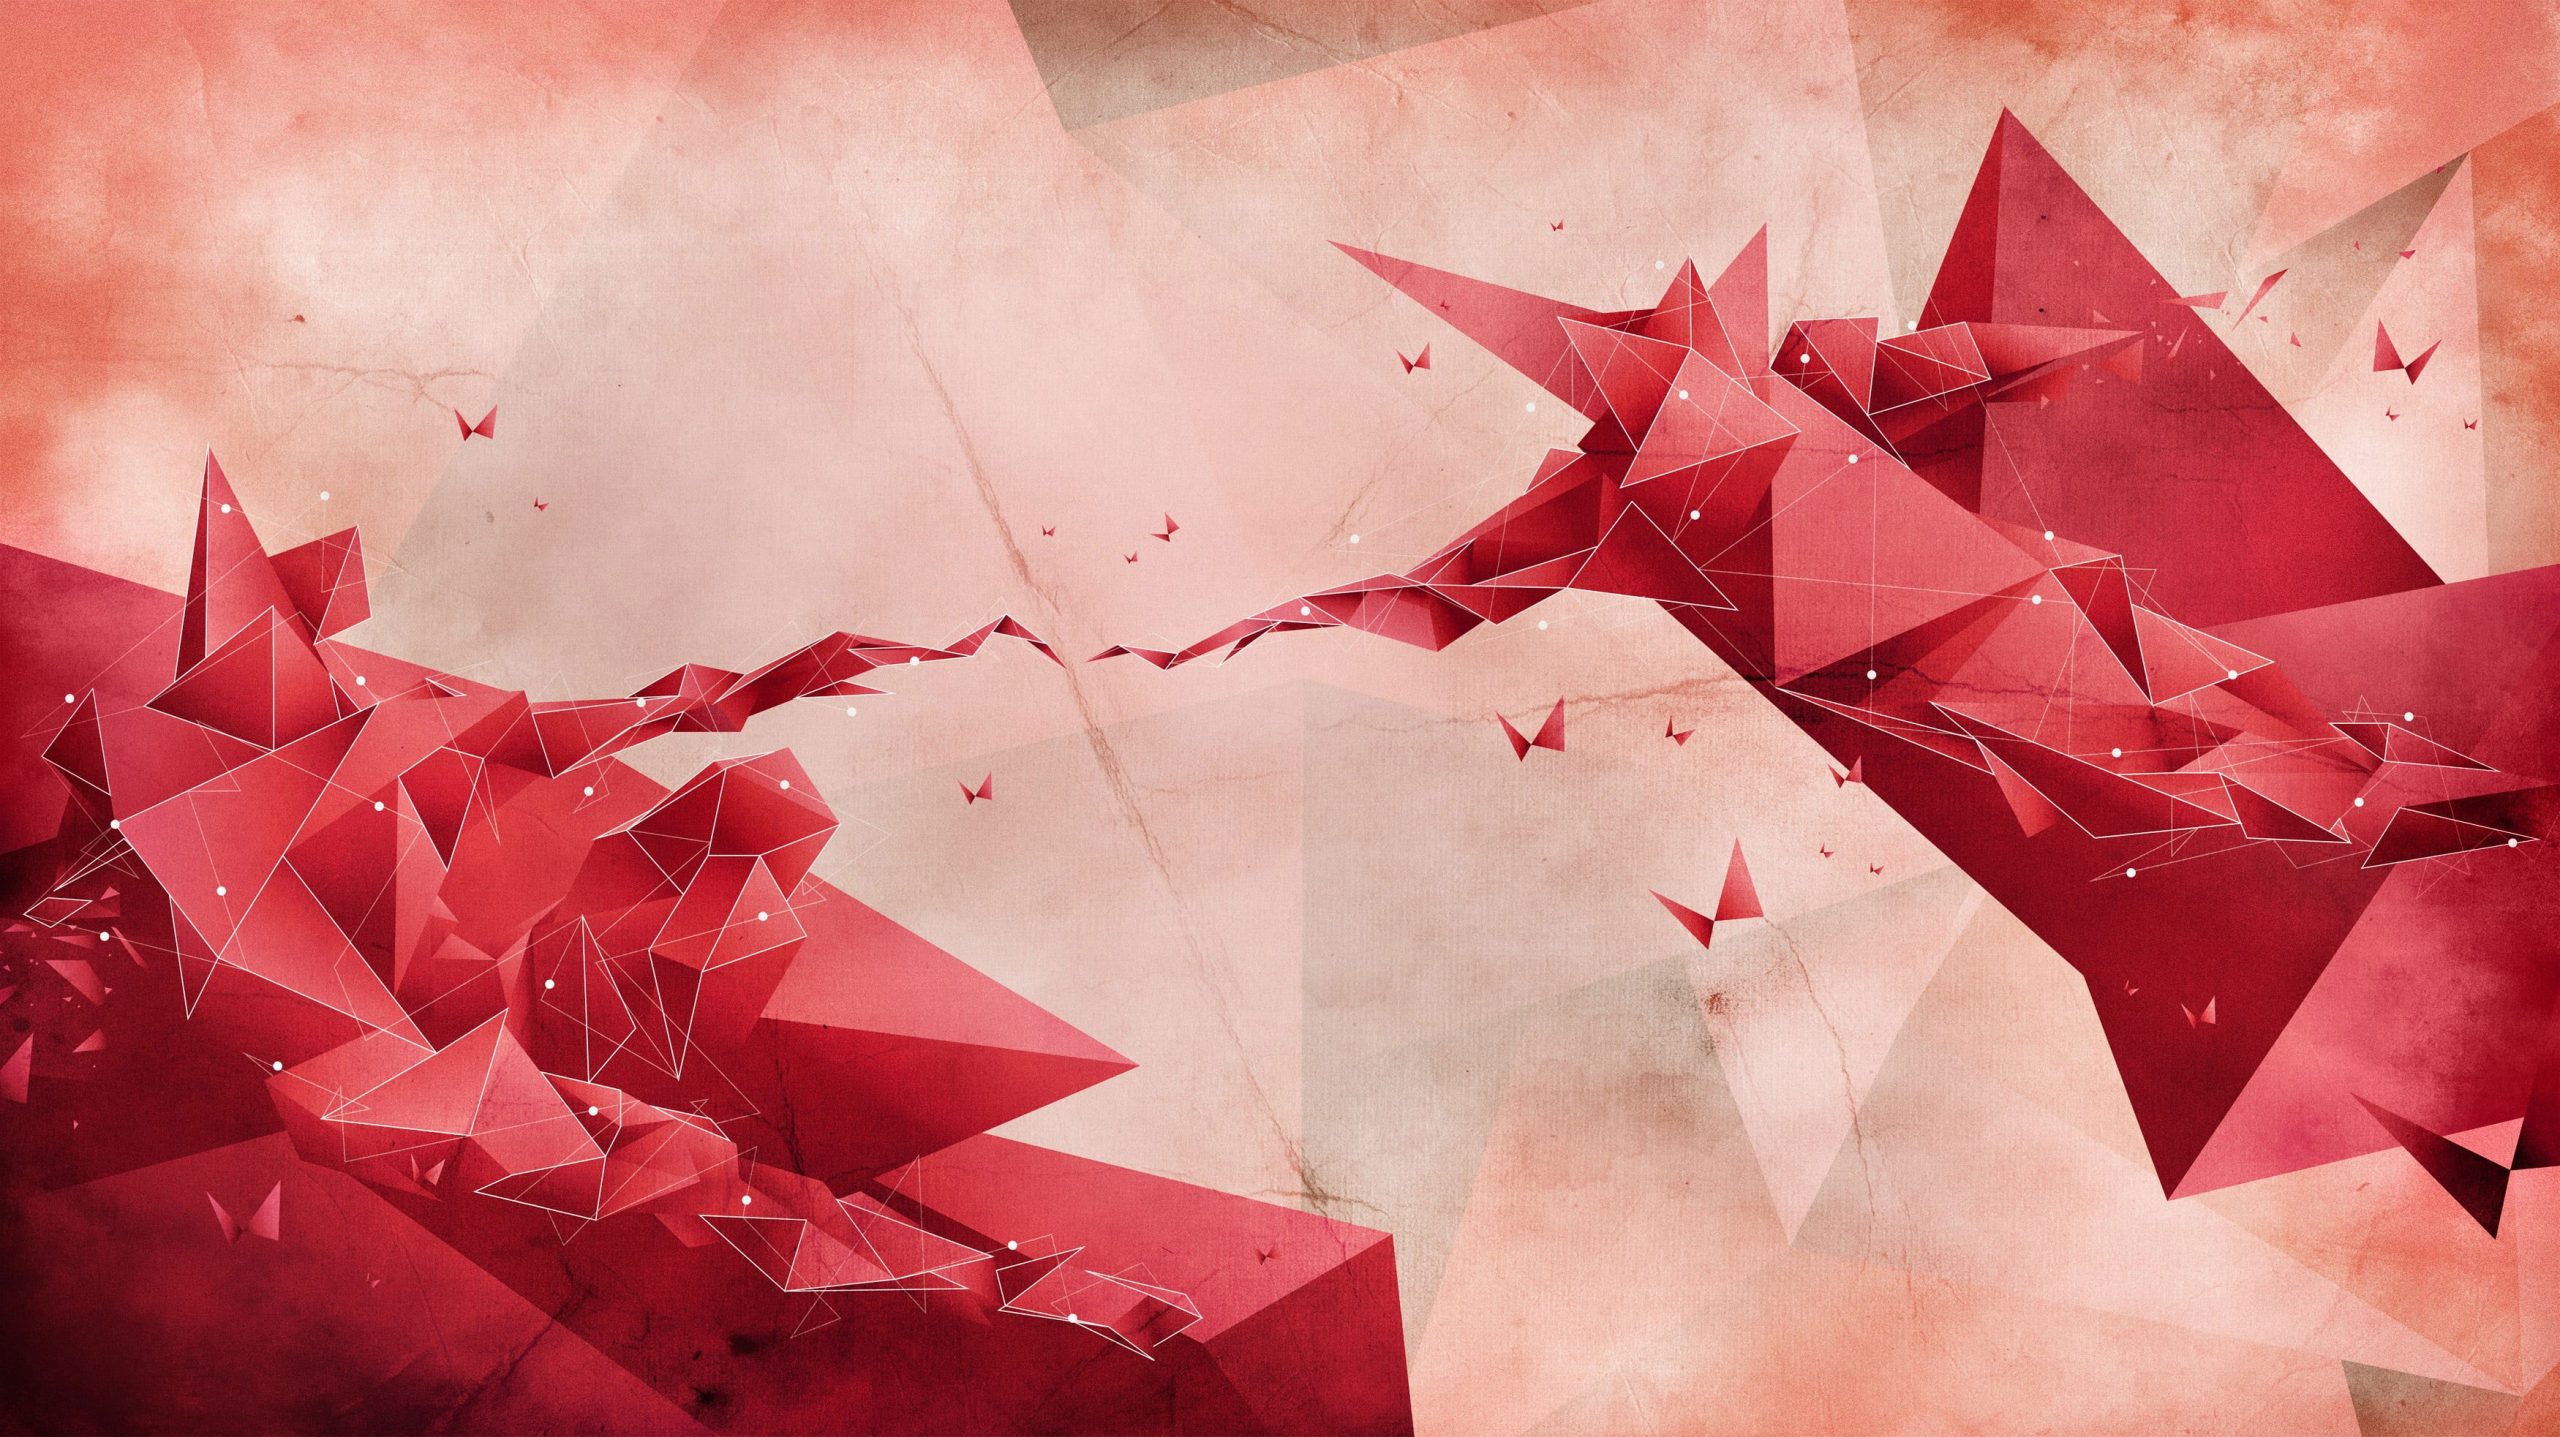 Wallpaper Red And Pink Abstract Painting, Digital Art